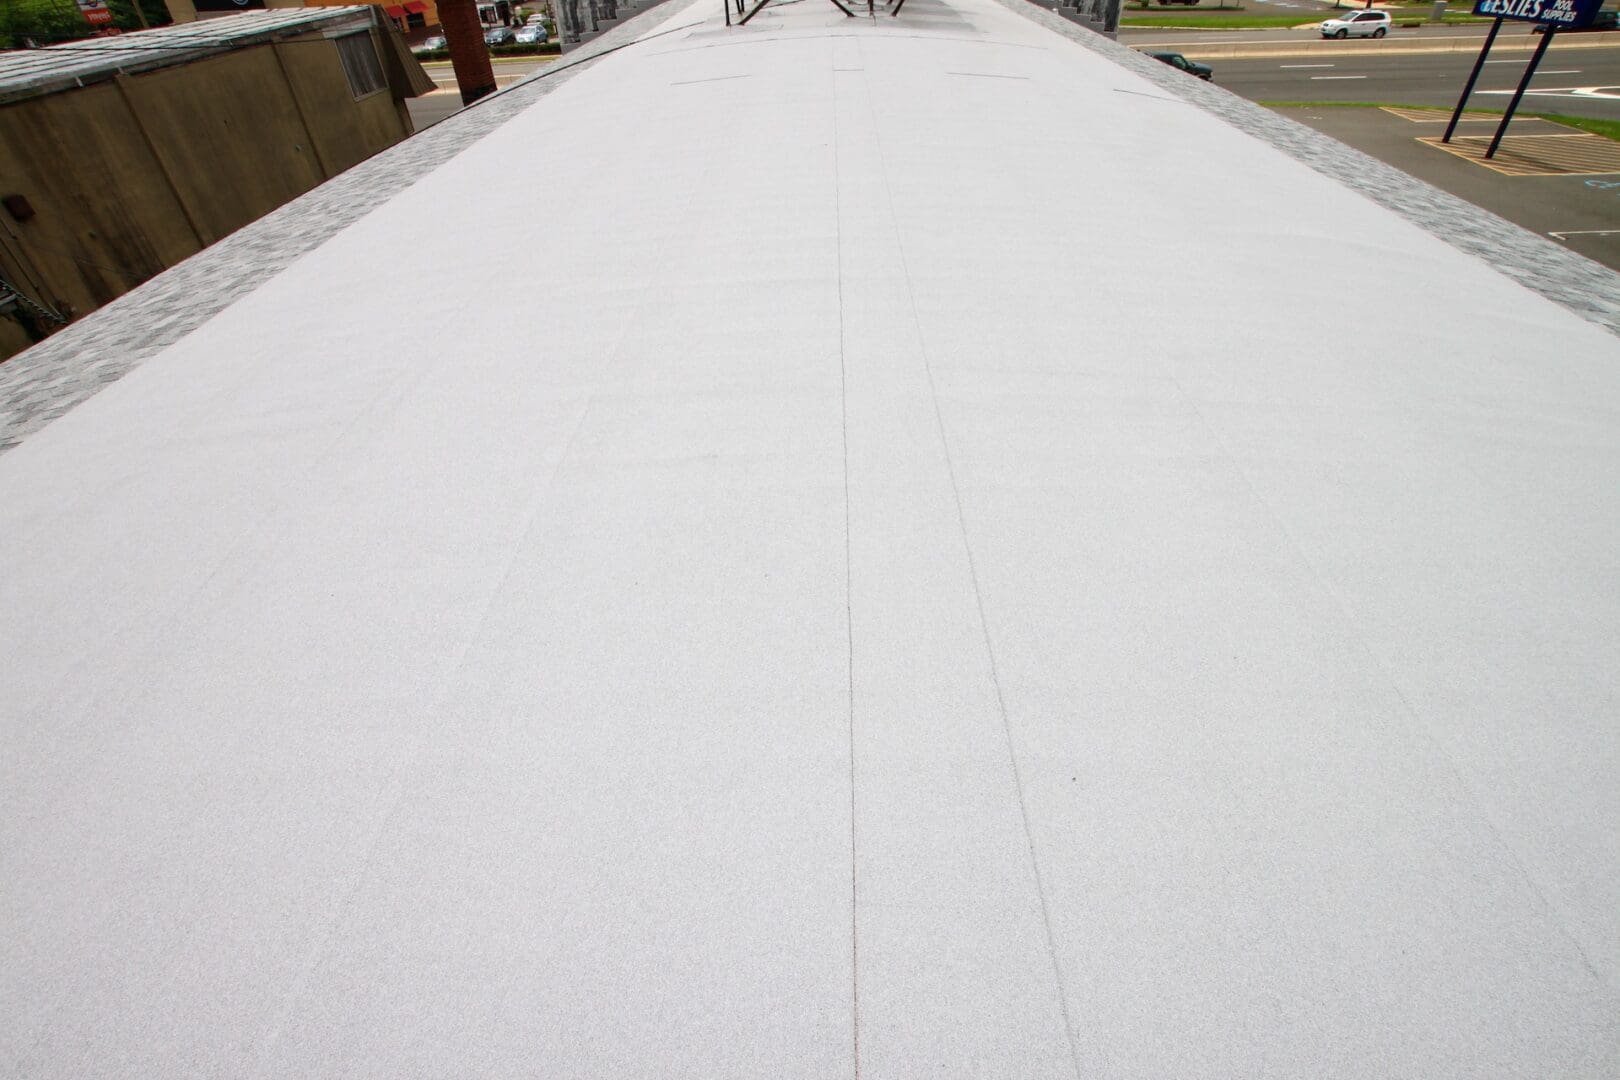 A white sheet granulated flat roof on top of a large building.